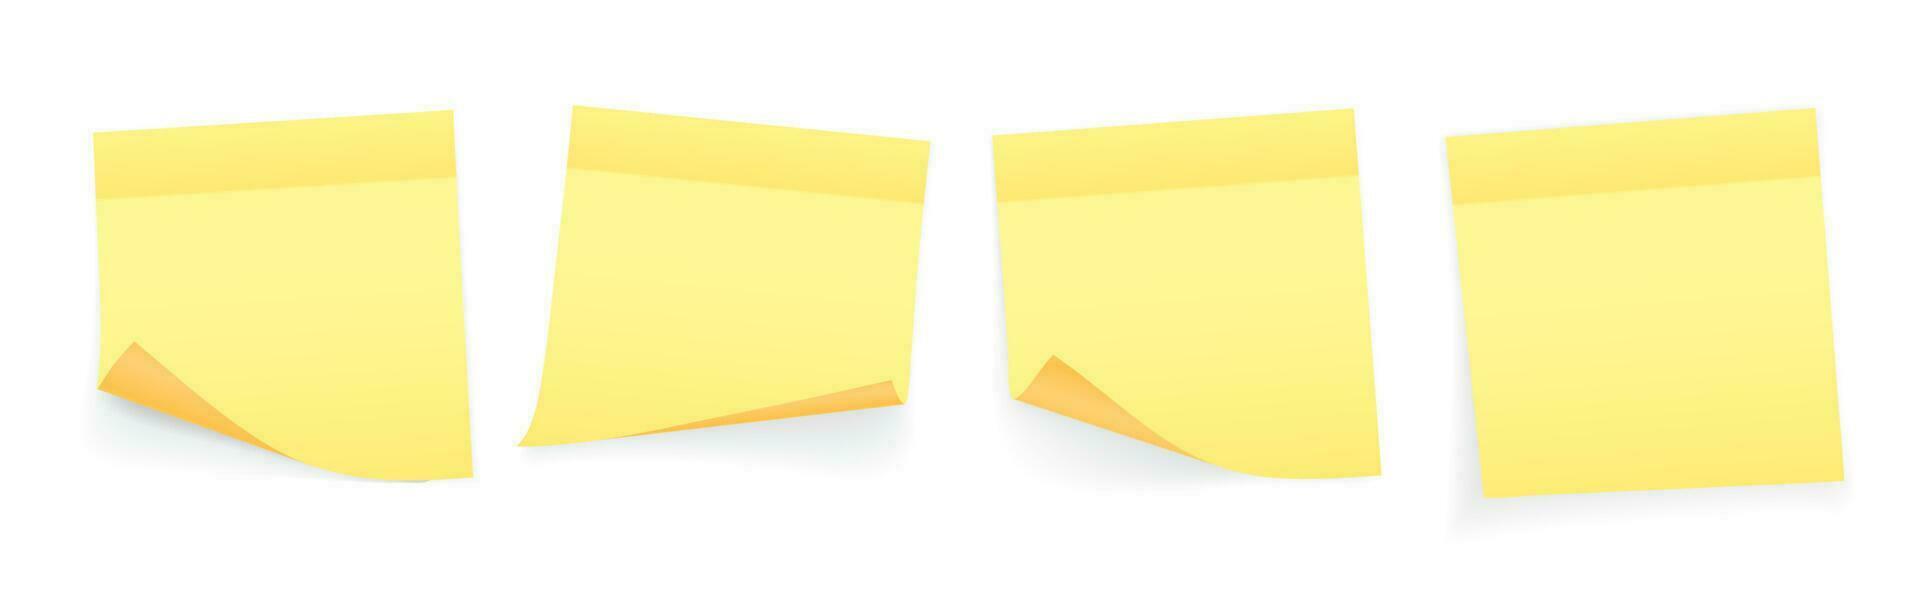 Collection of yellow colored sheets of note papers with curled corner and shadow, ready for your message. Realistic. Isolated on white background. Set. Vector illustration